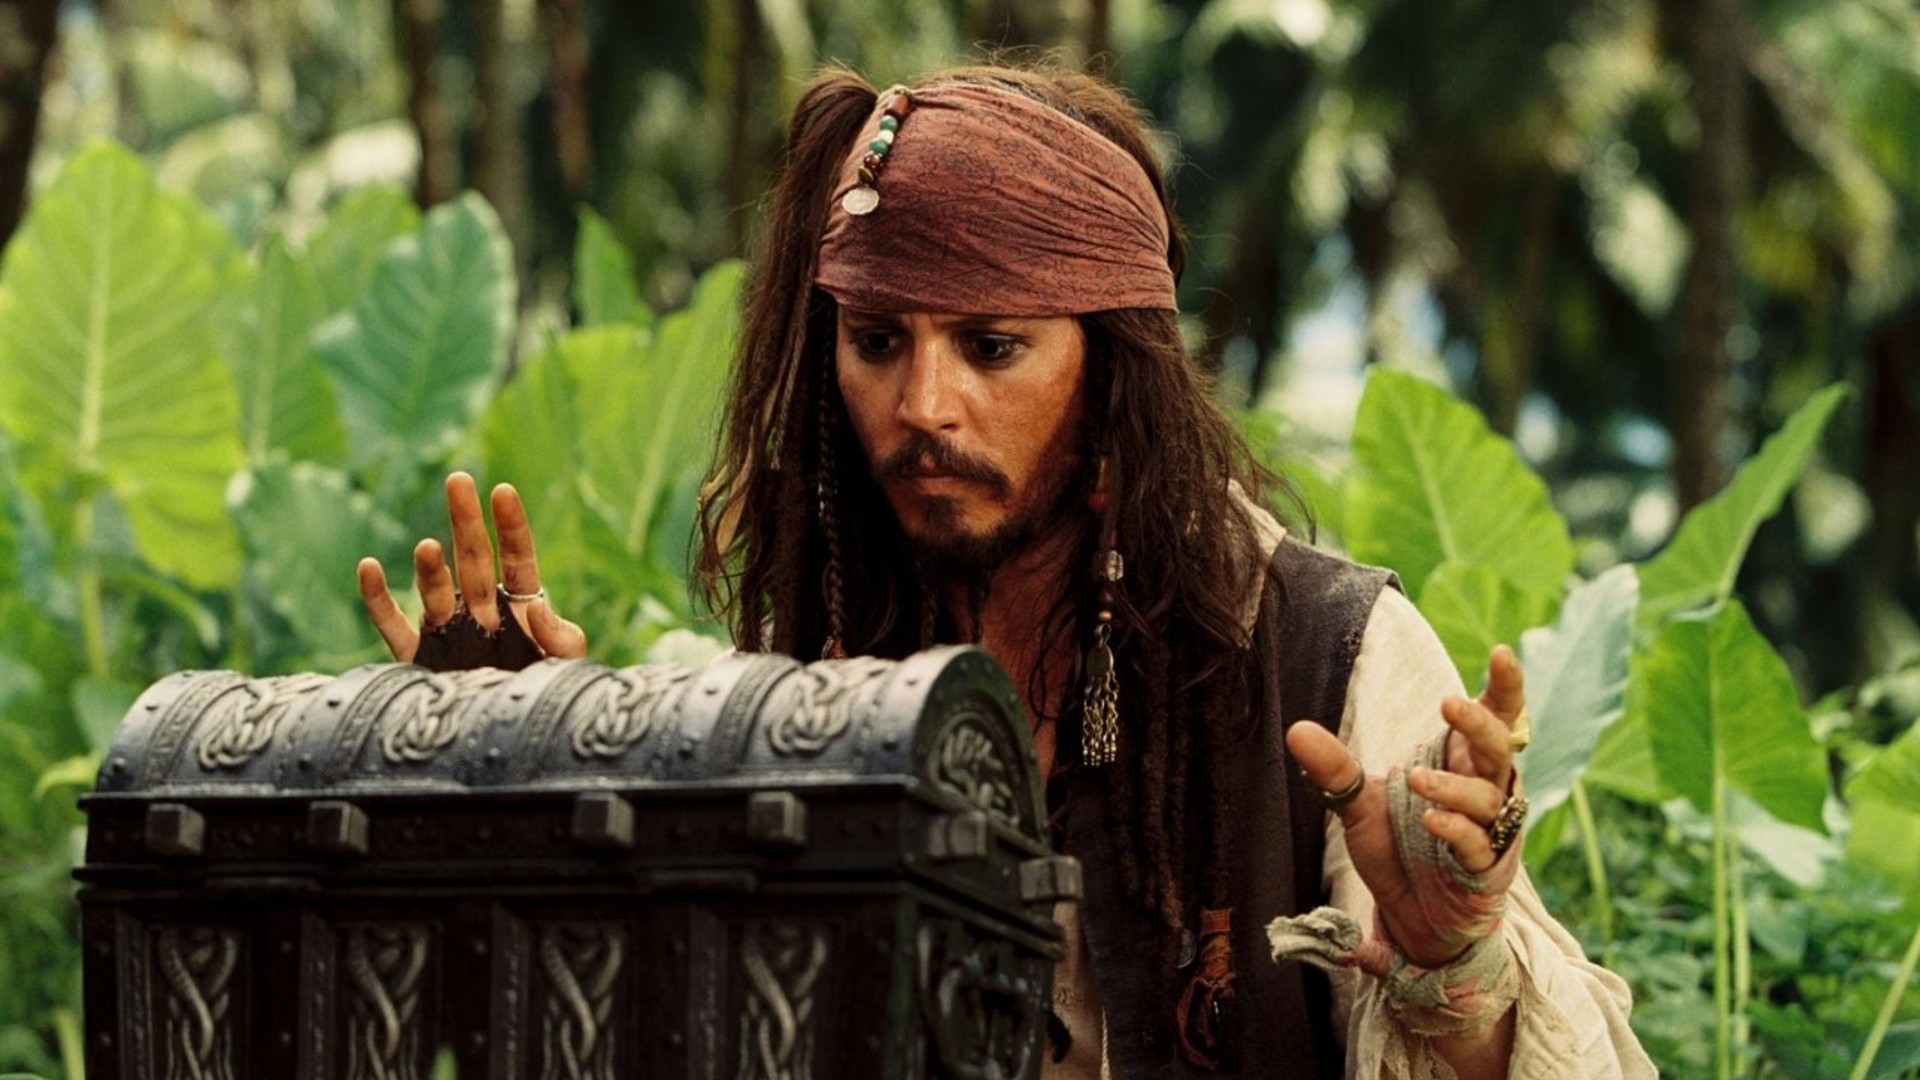 Johnny Depp as Jack Sparrow in Pirates of the Caribbean: Dead Man's Chest